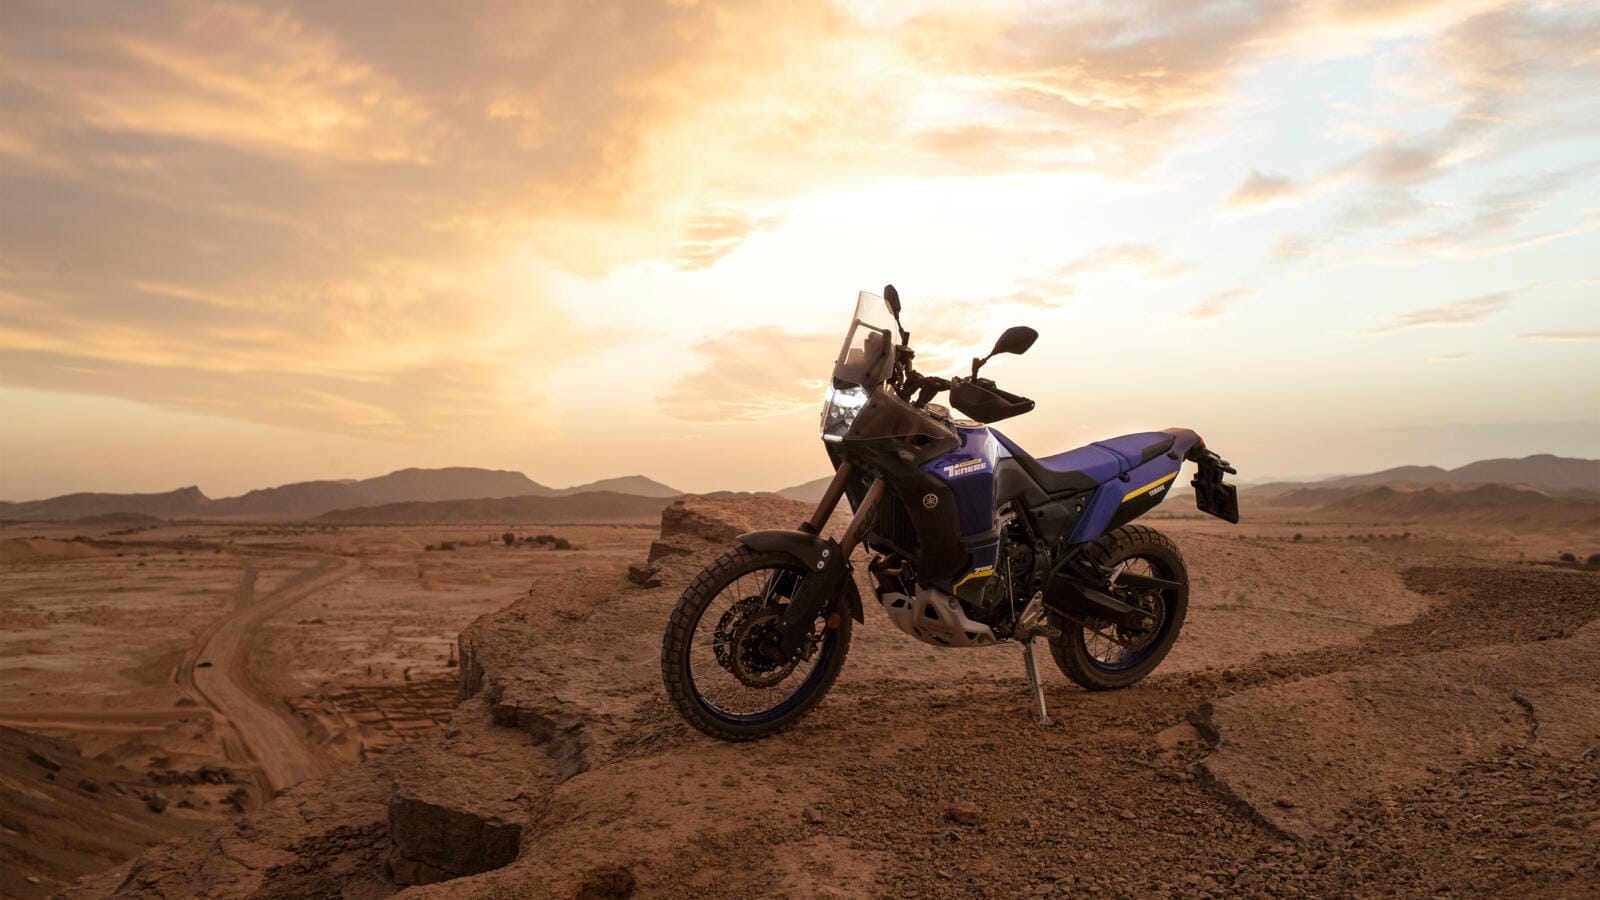 Yamaha Tenere 700 World Raid presented (facts and figures)
- also in the MOTORCYCLES.NEWS APP